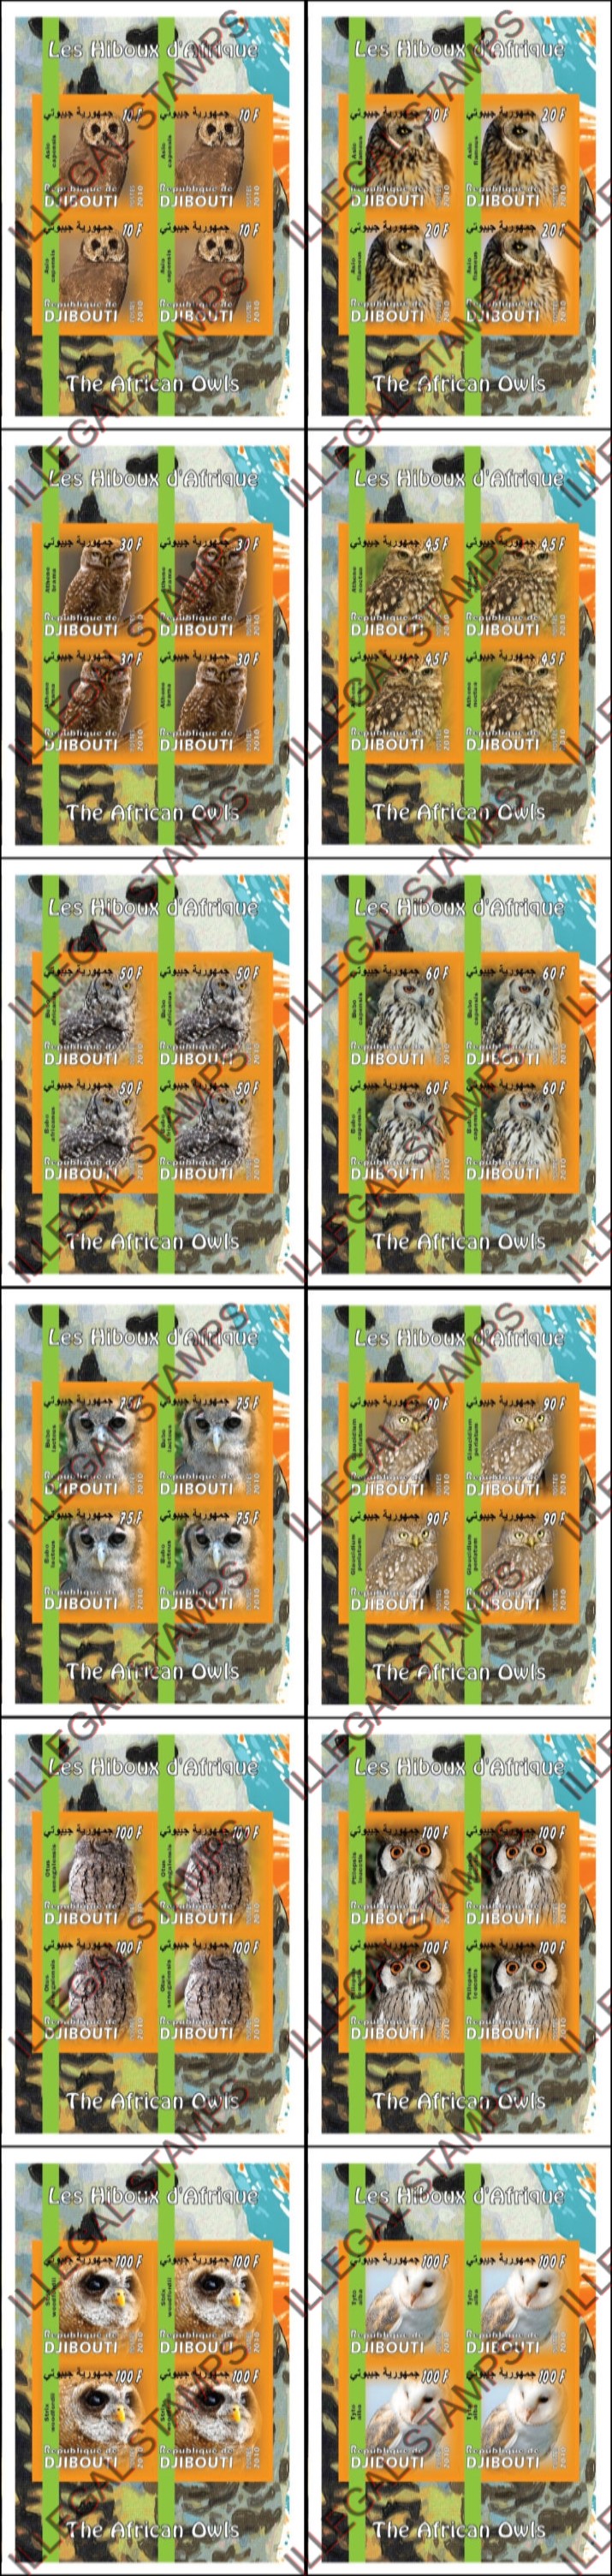 Djibouti 2010 Owls Illegal Stamp Deluxe Souvenir Sheets of 4